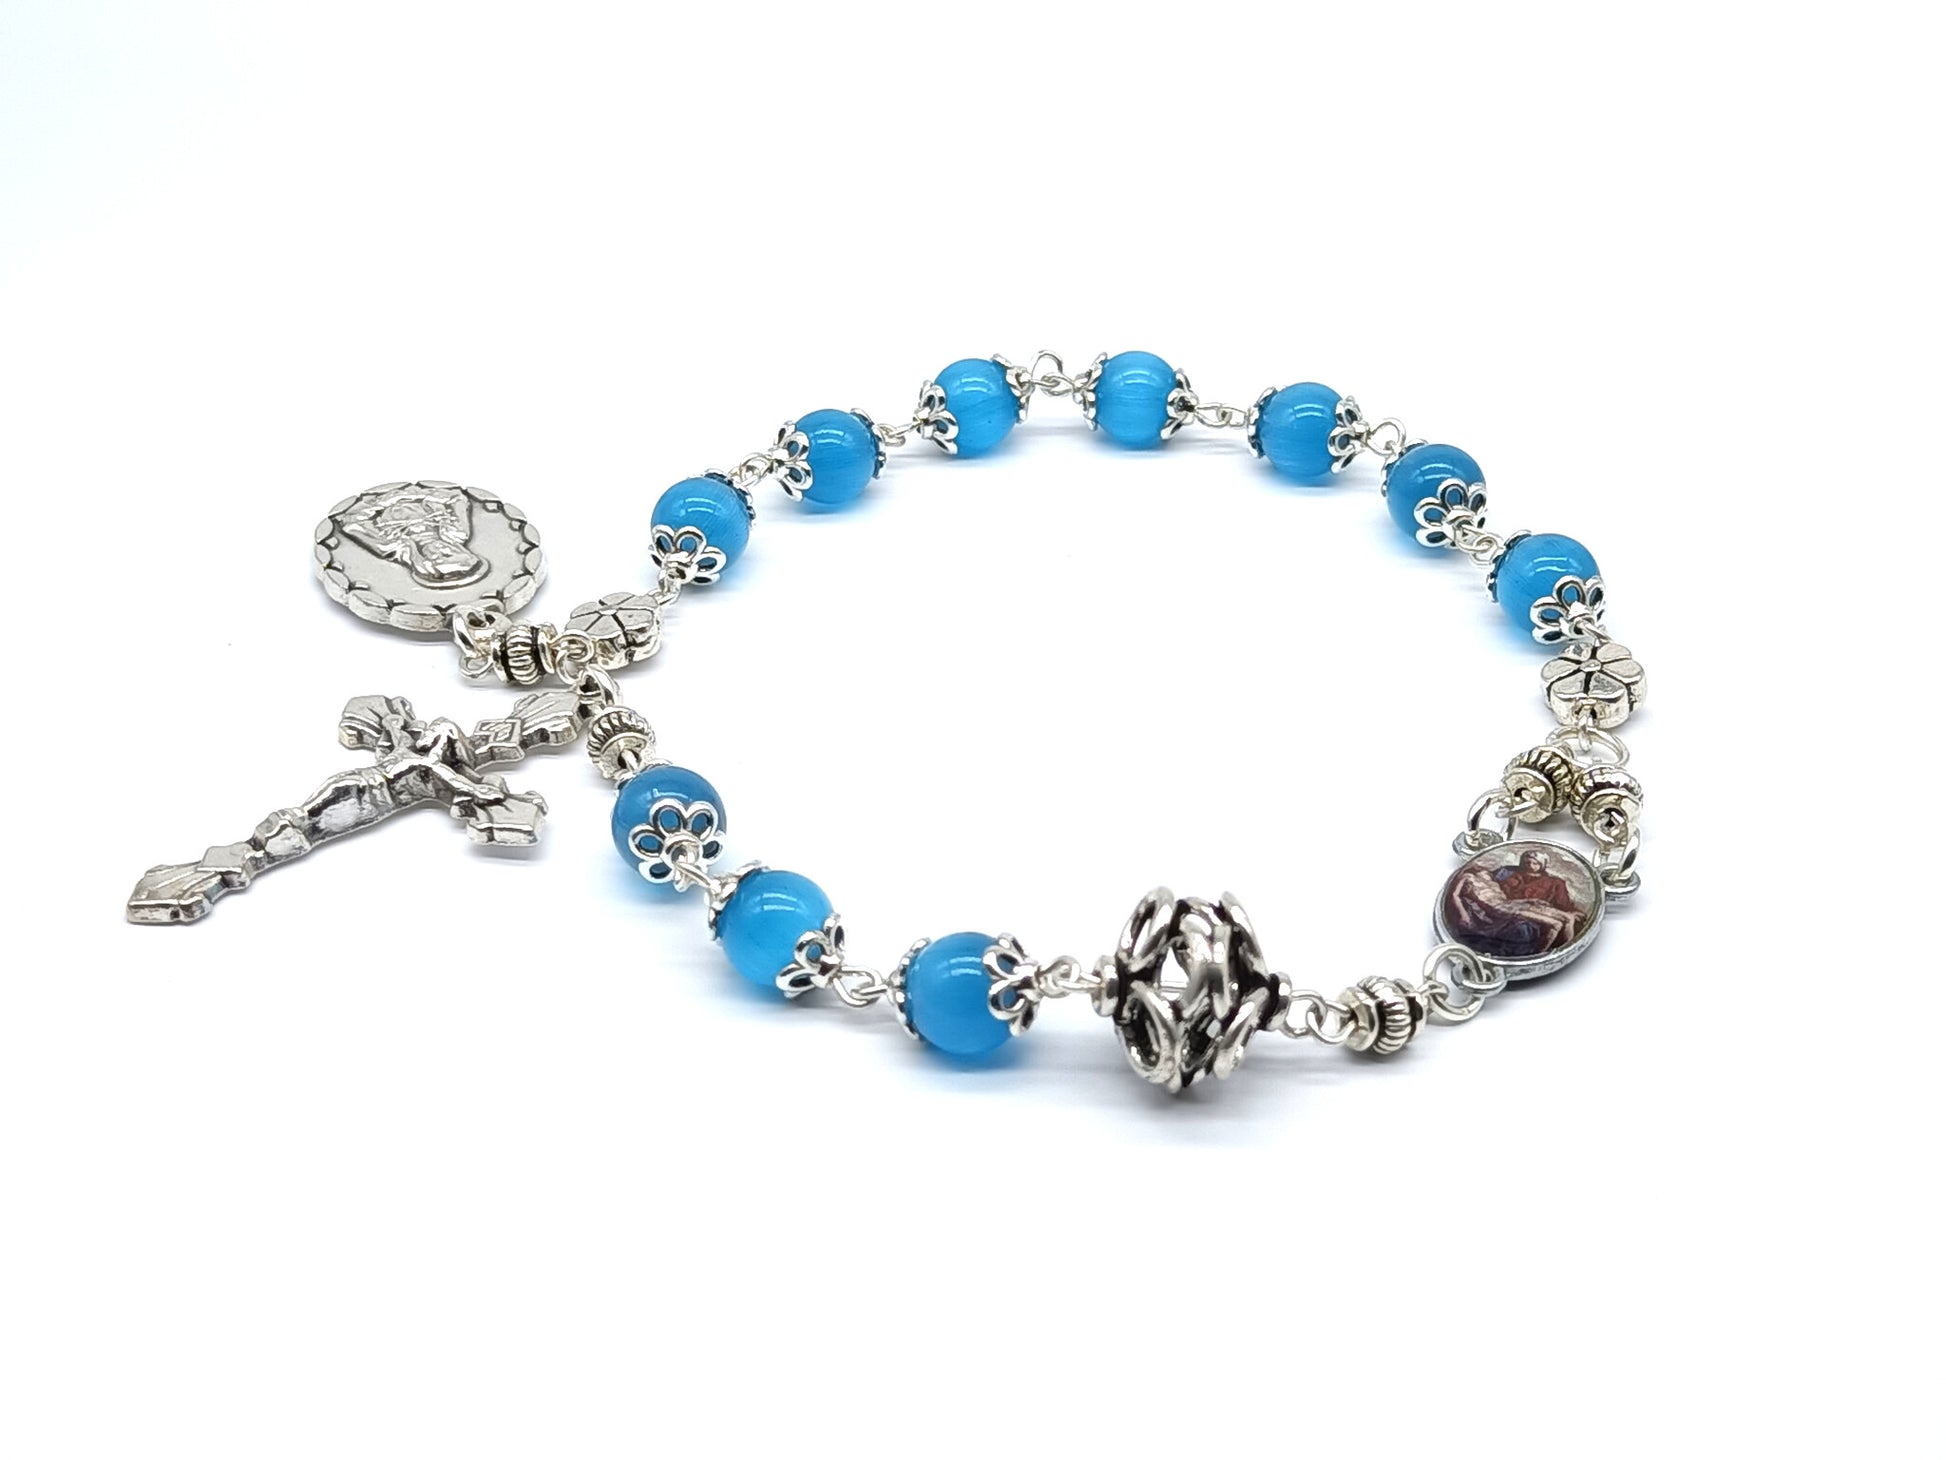 Pocket servite unique dolor rosary beads with blue glass beads and silver crucifix, medals and dolour bead.